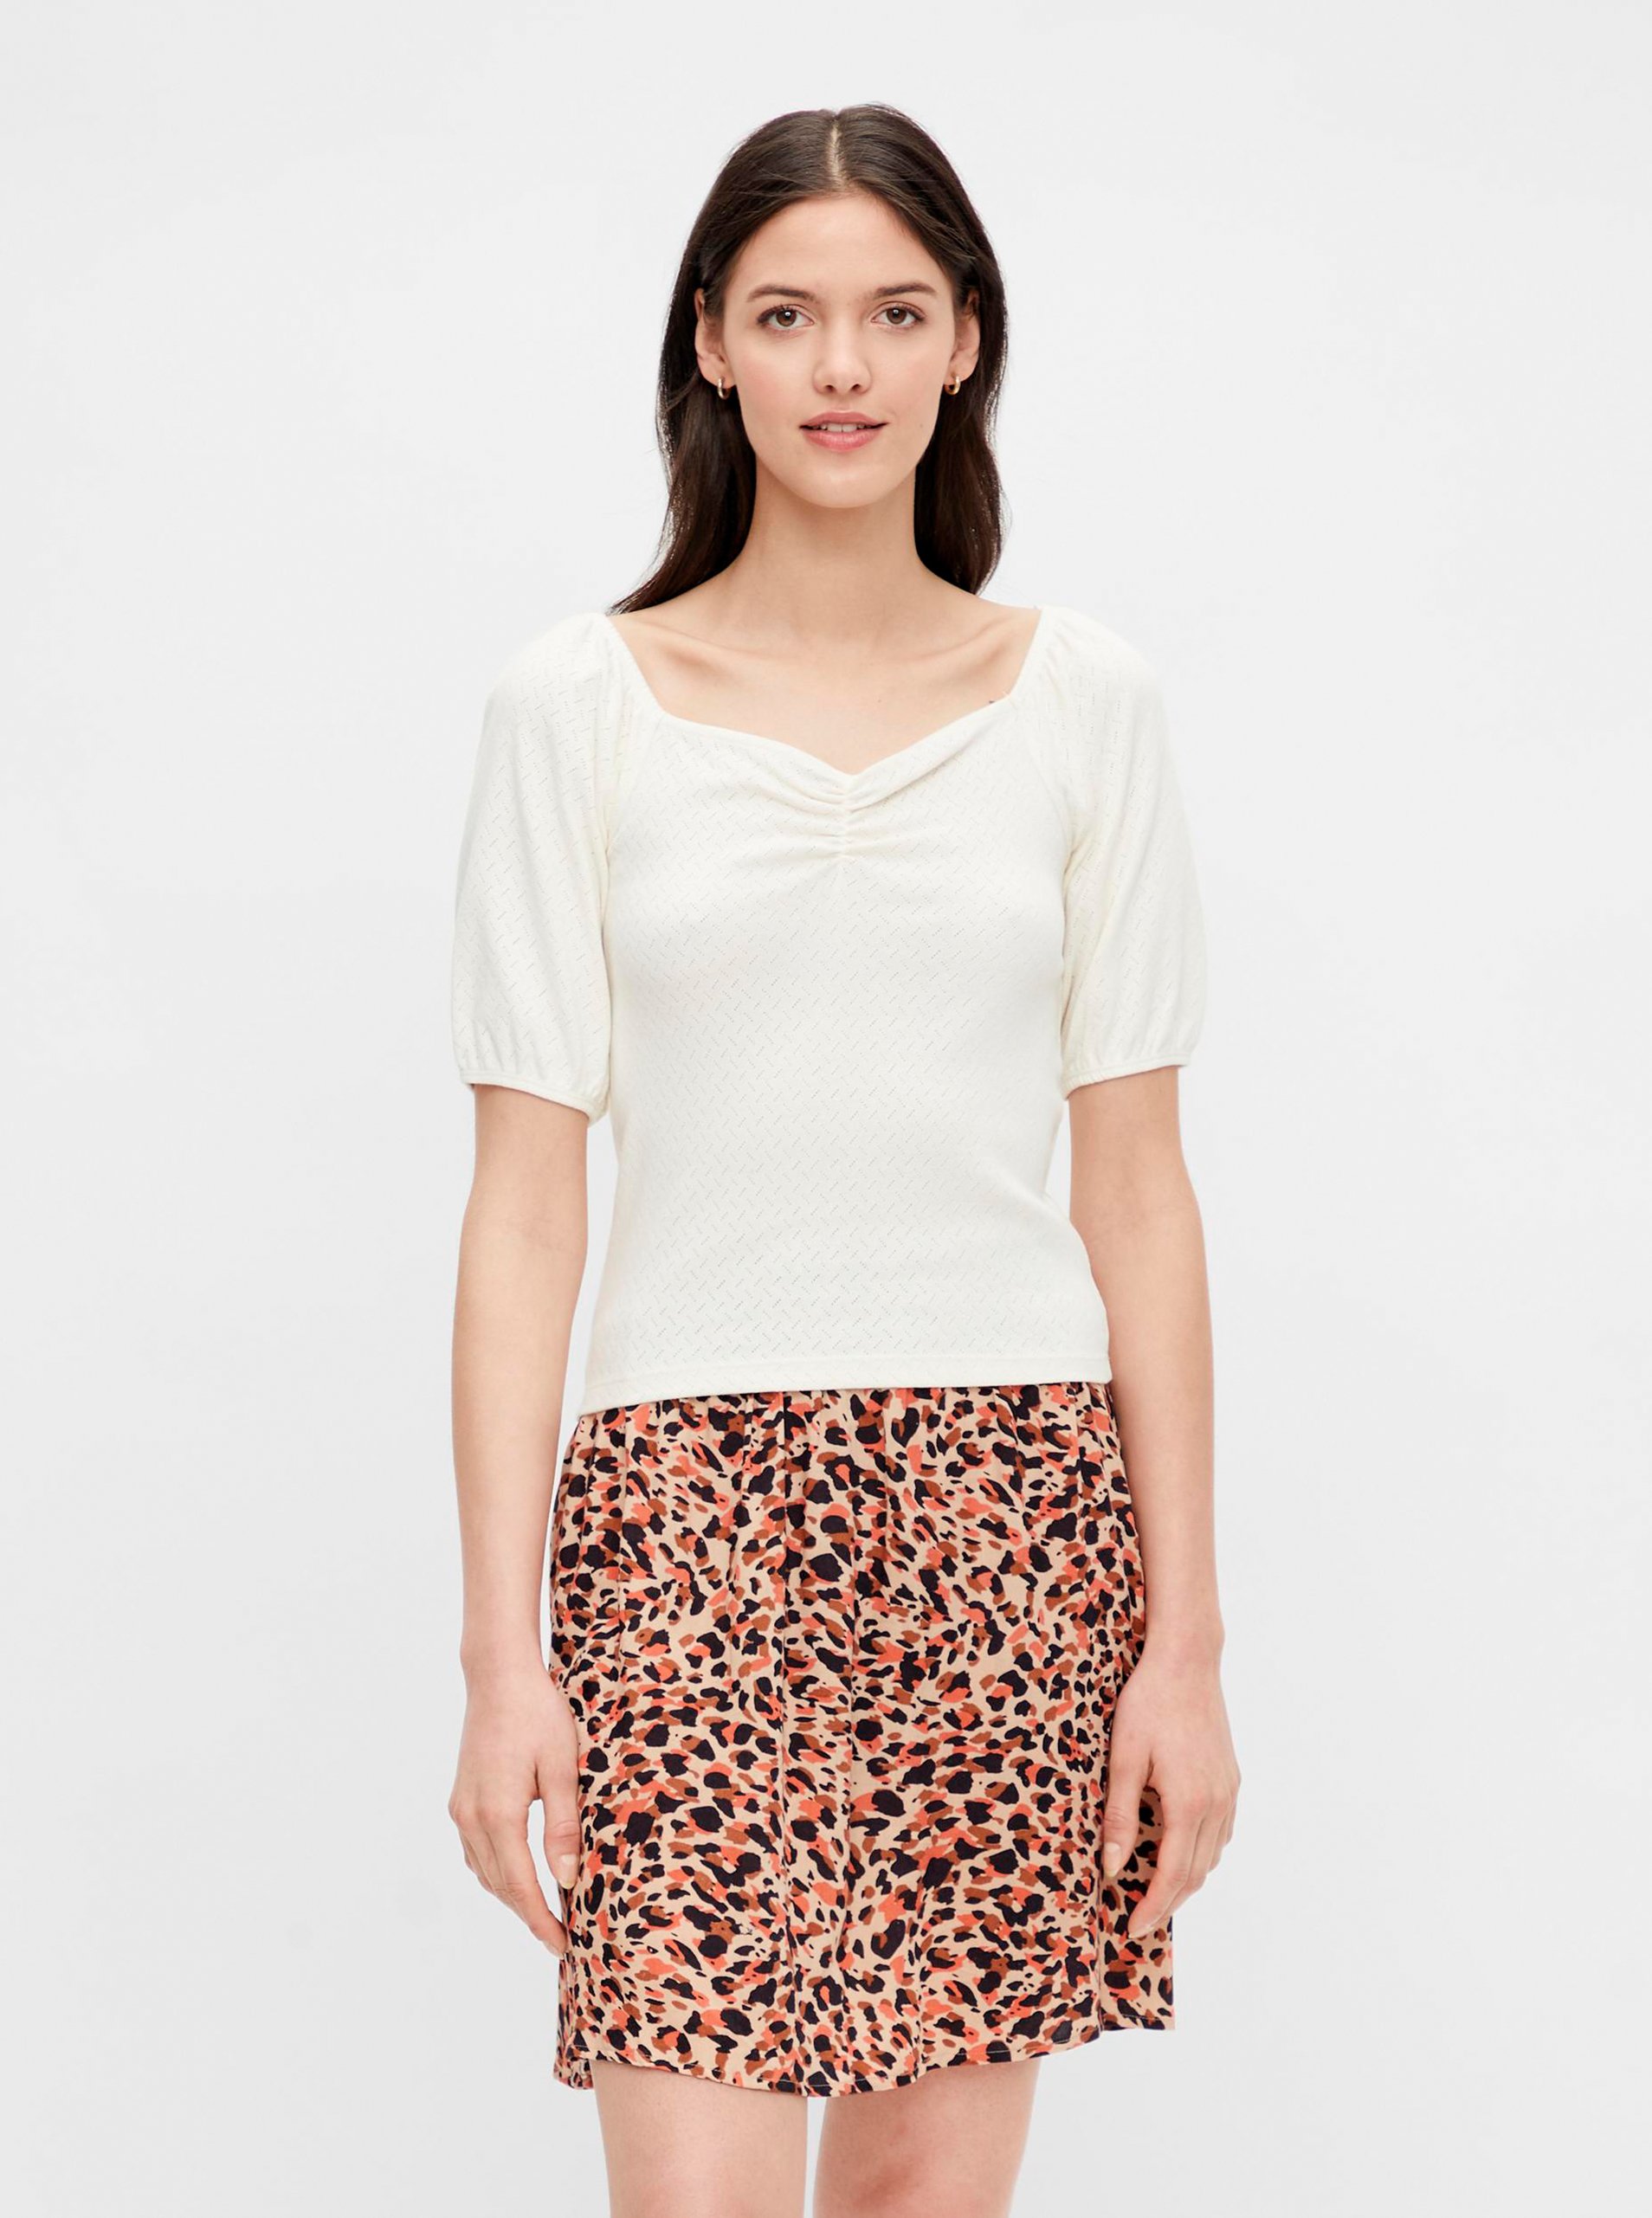 Cream patterned blouse Pieces Lucy - Women